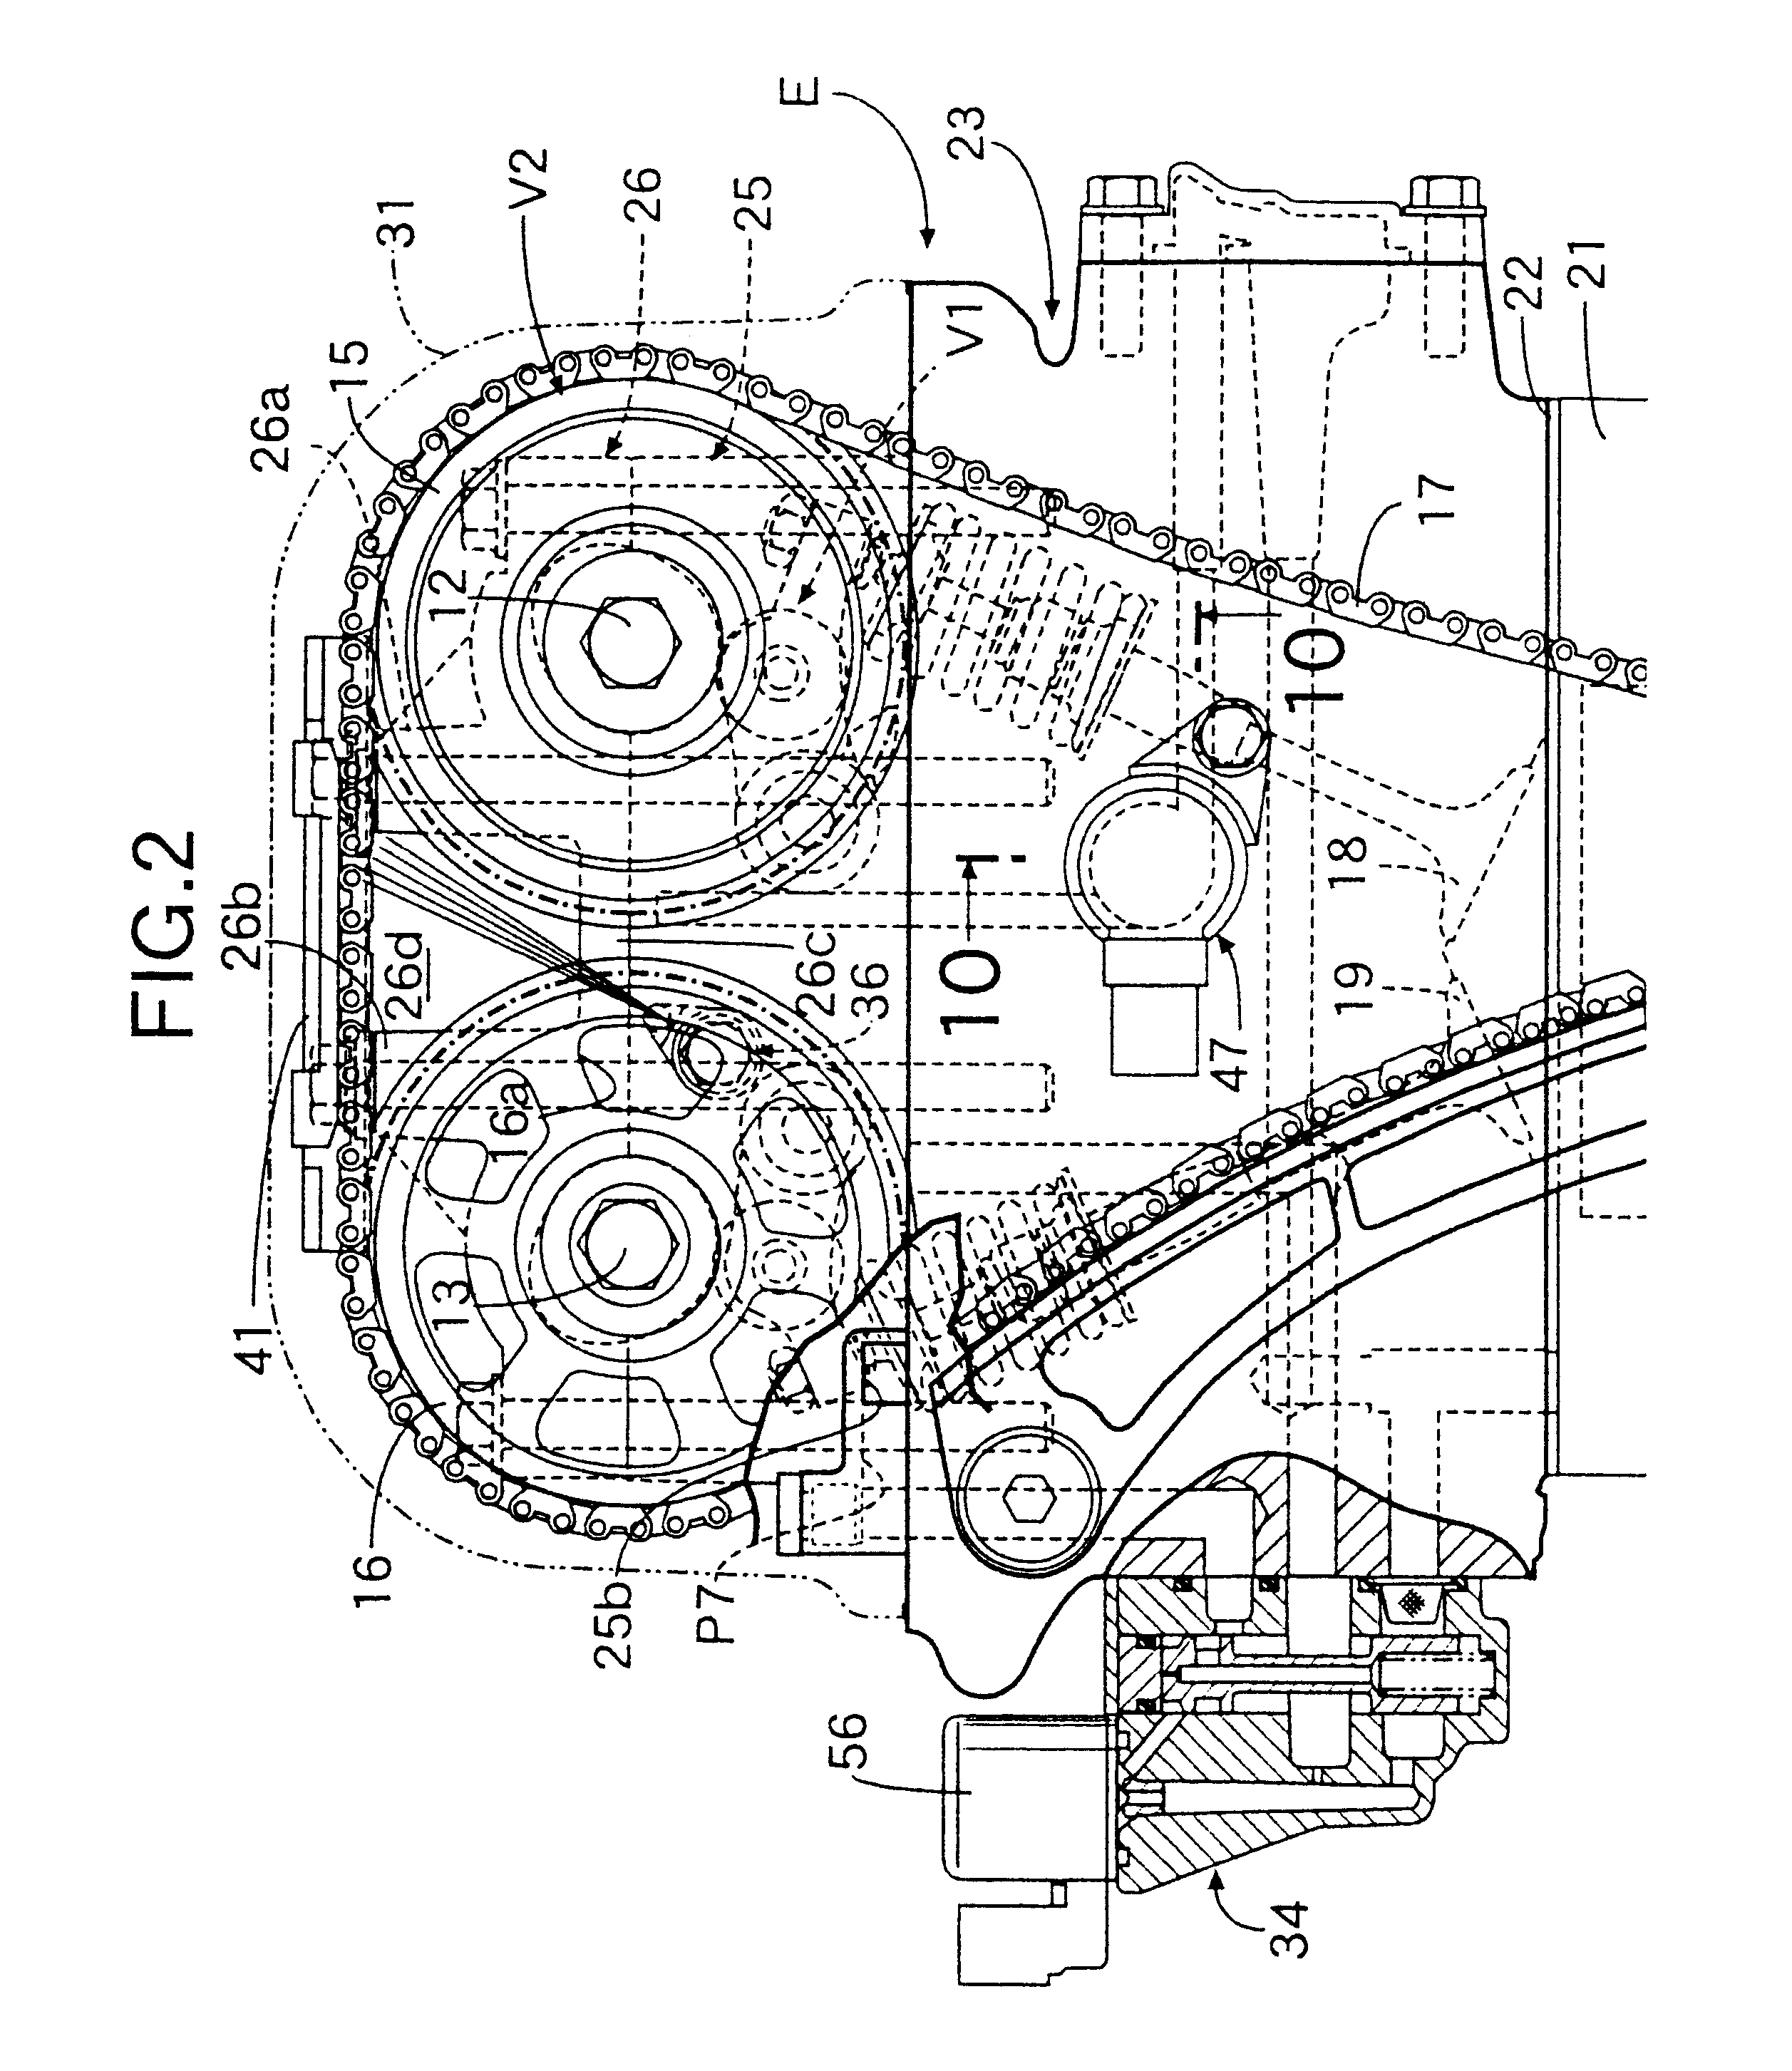 Timing chain lubricating system for engine